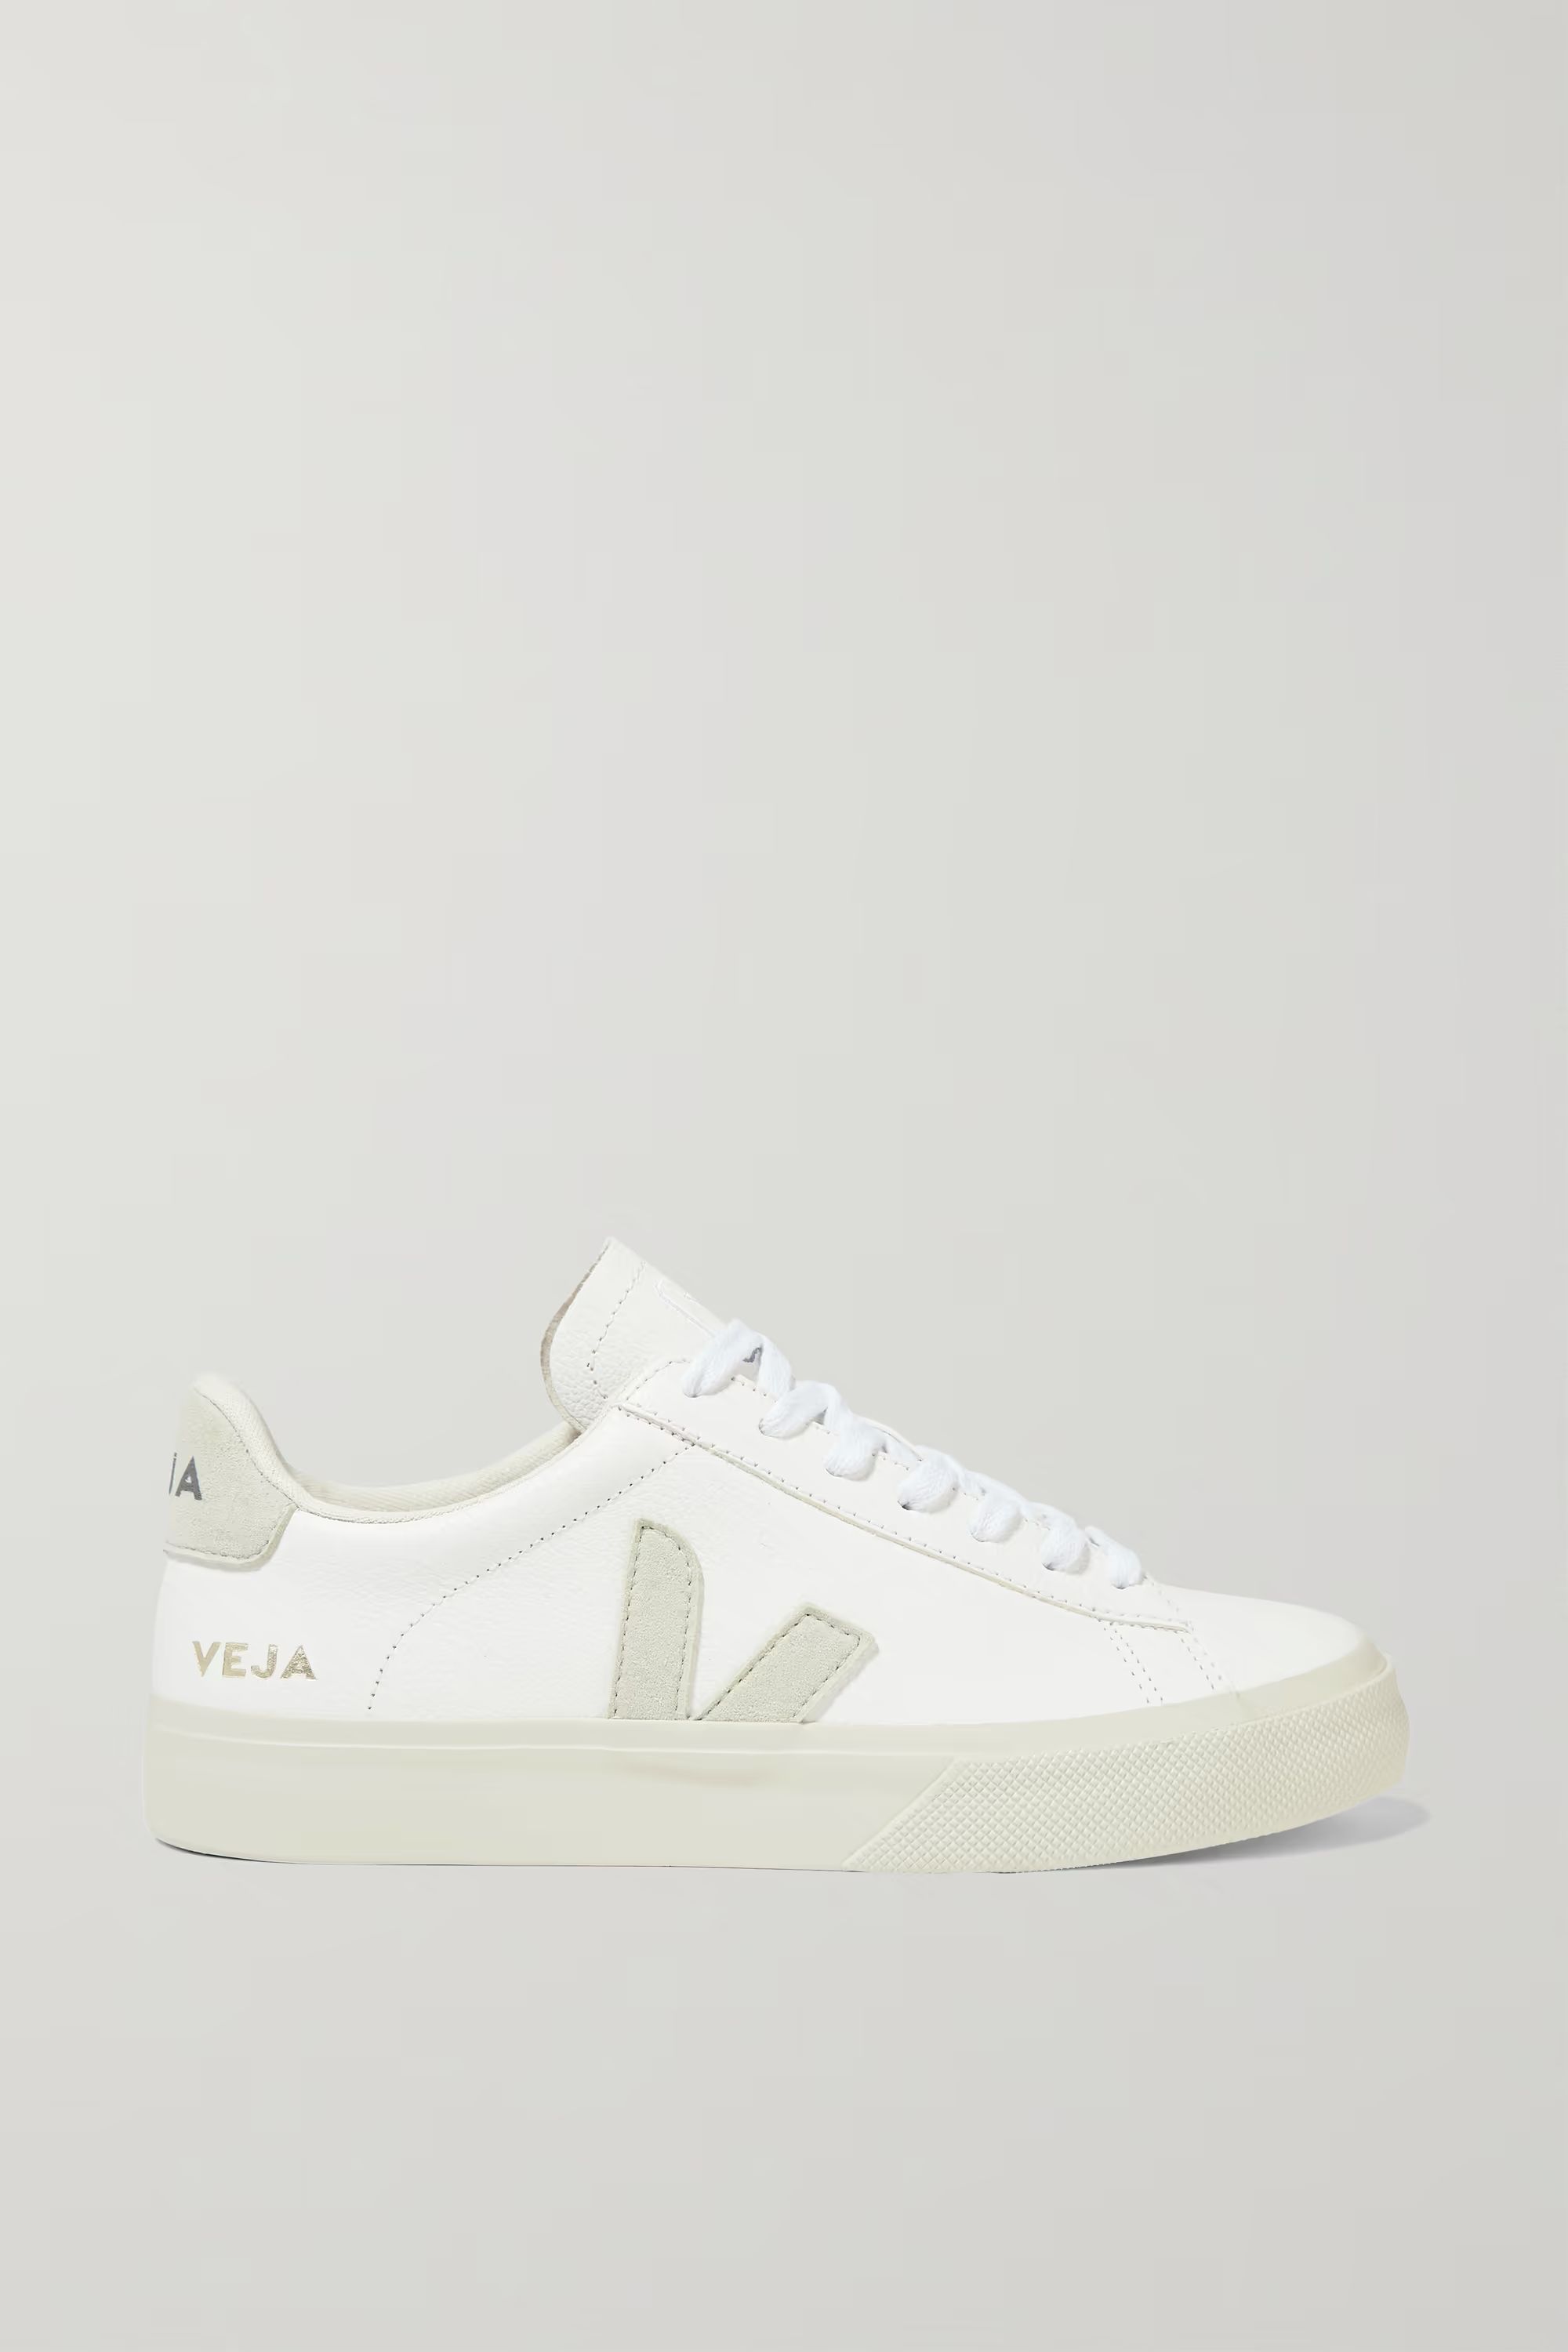 White + NET SUSTAIN Campo leather and vegan suede sneakers | VEJA | NET-A-PORTER | NET-A-PORTER (US)